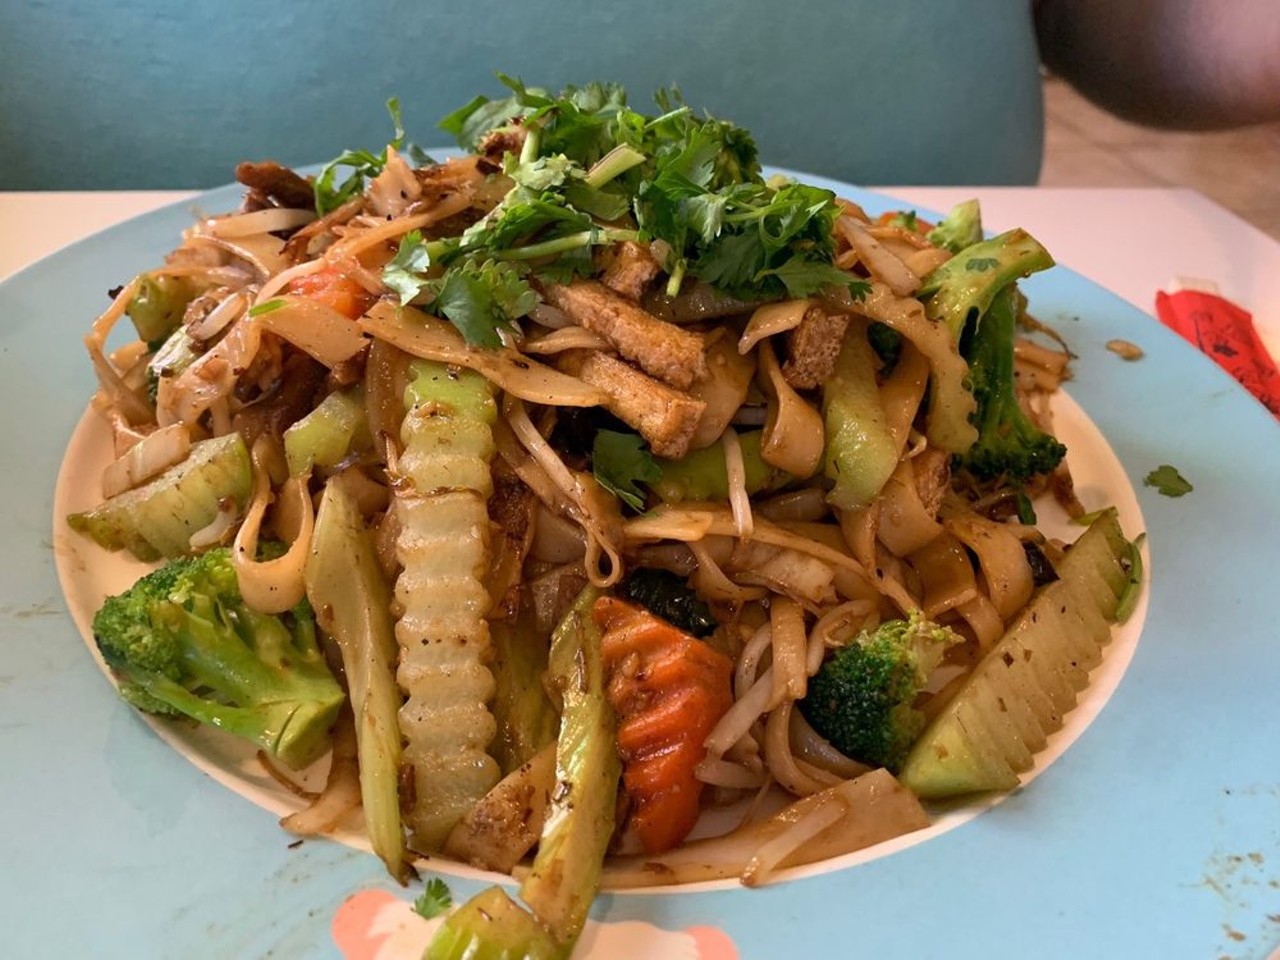 Loving Hut
2101 E. Colonial Drive, Orlando
Loving Hut's menu highlights homemade vegan Asian dishes, drinks and desserts. From sushi to dumplings to stir fries and noodles, this East Colonial spot has plenty of plant-based goodness to choose from.